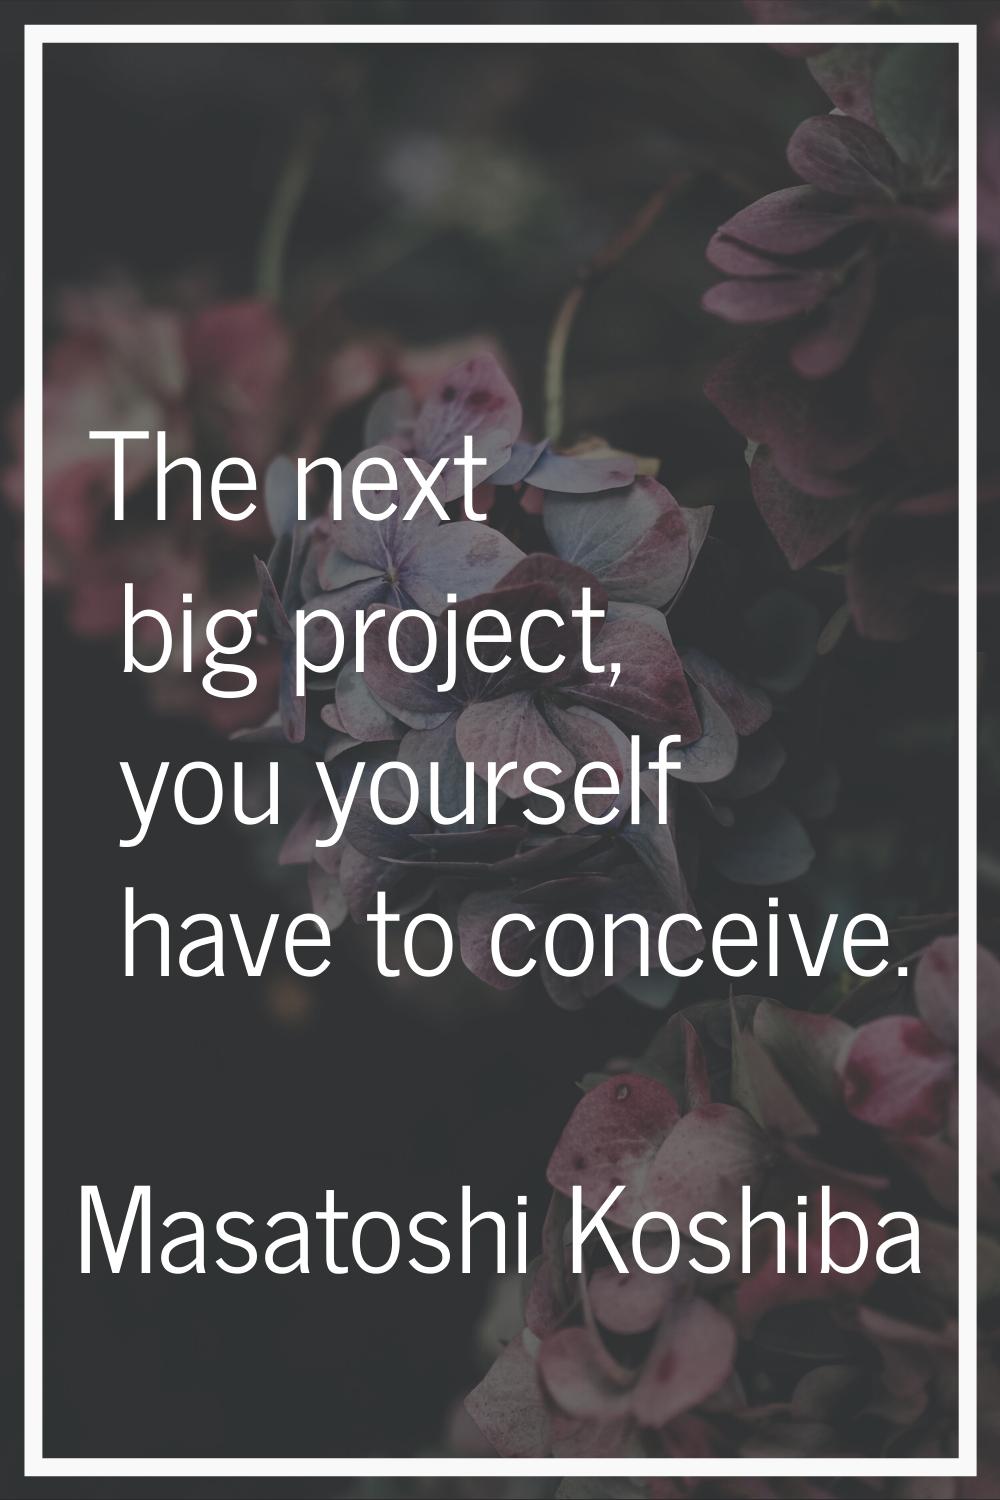 The next big project, you yourself have to conceive.